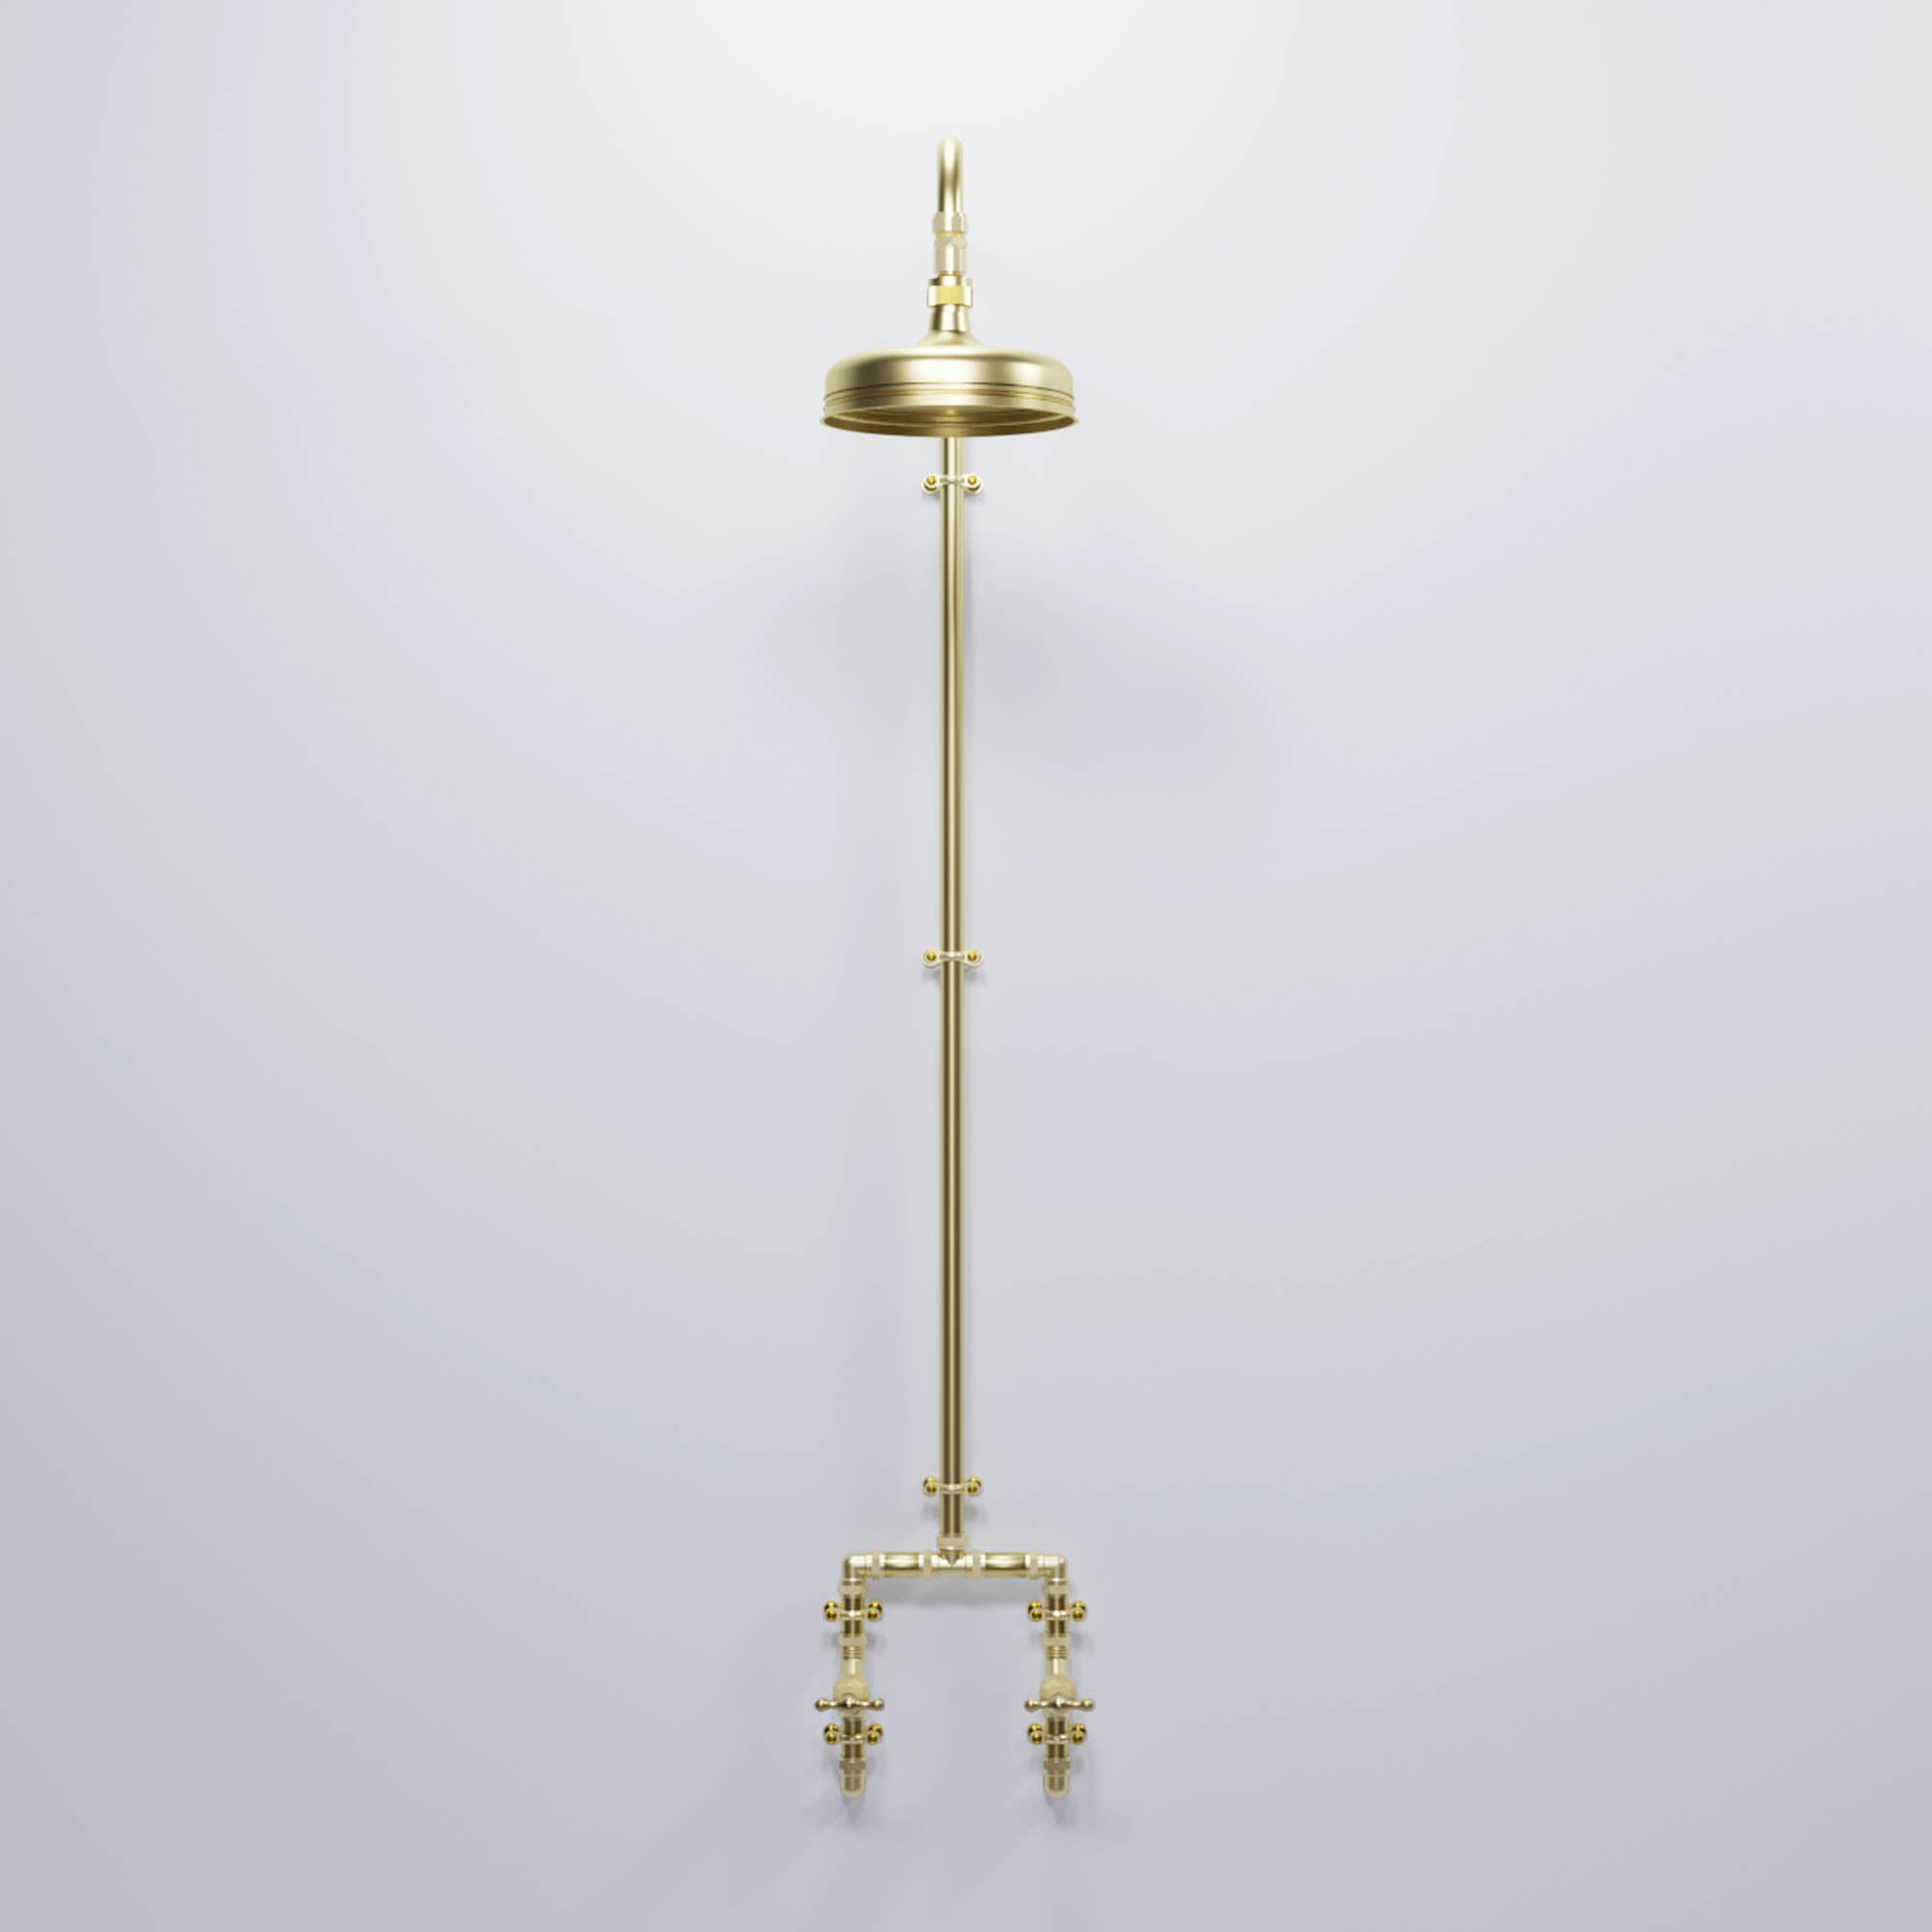 brass shower handcrafted and featured with a brass rainfall shower head, made in Brighton UK